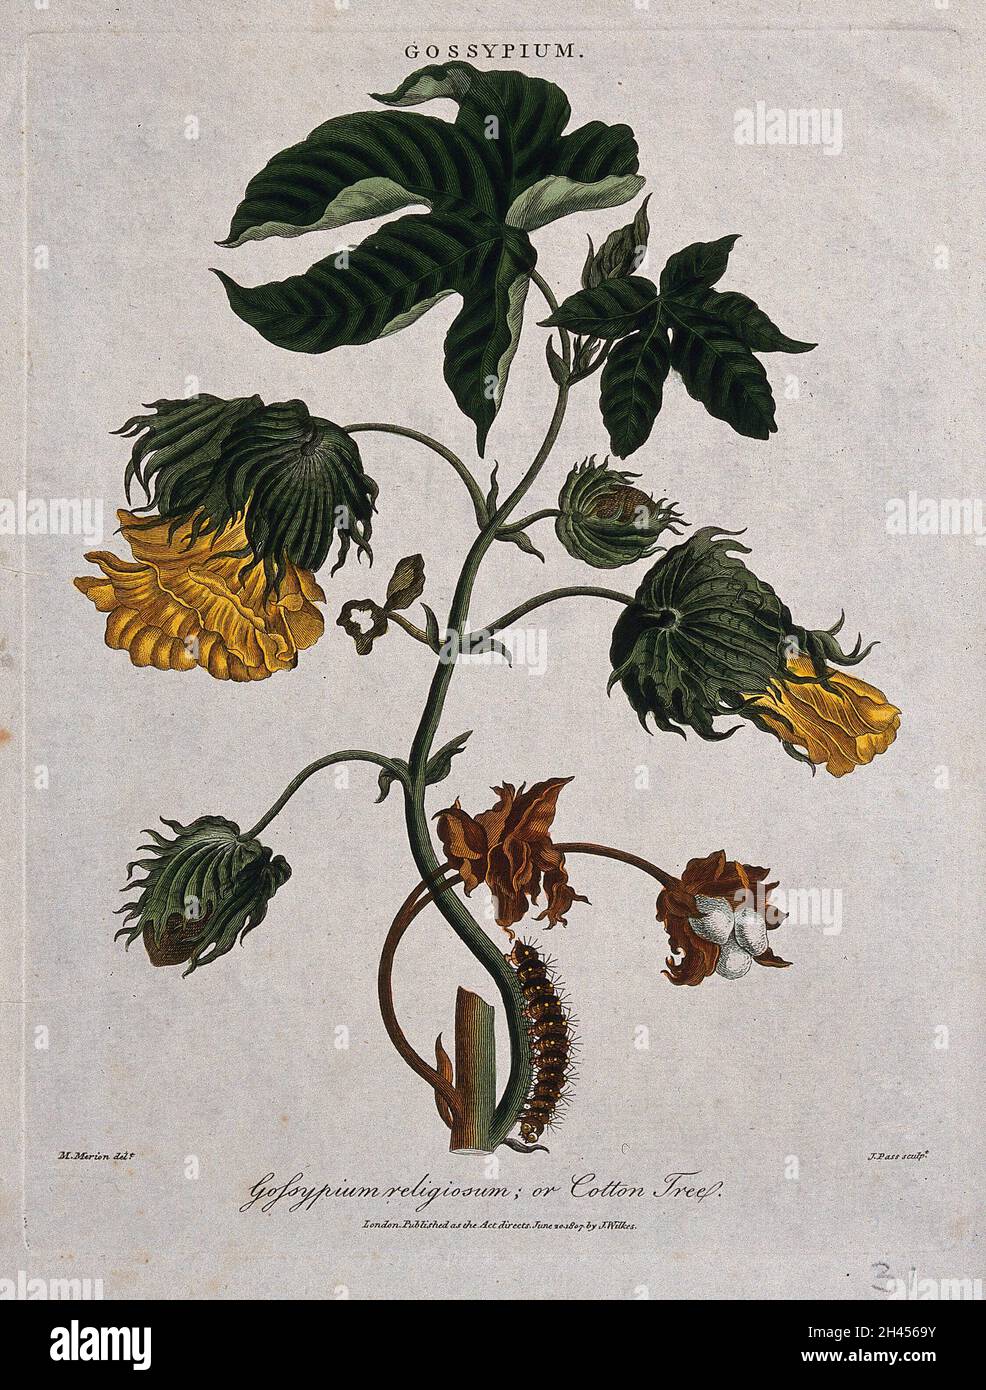 Tree cotton (Gossypium arboreum): flowering and fruiting stem with caterpillar. Coloured etching by J. Pass, c. 1807, after M. Merian. Stock Photo